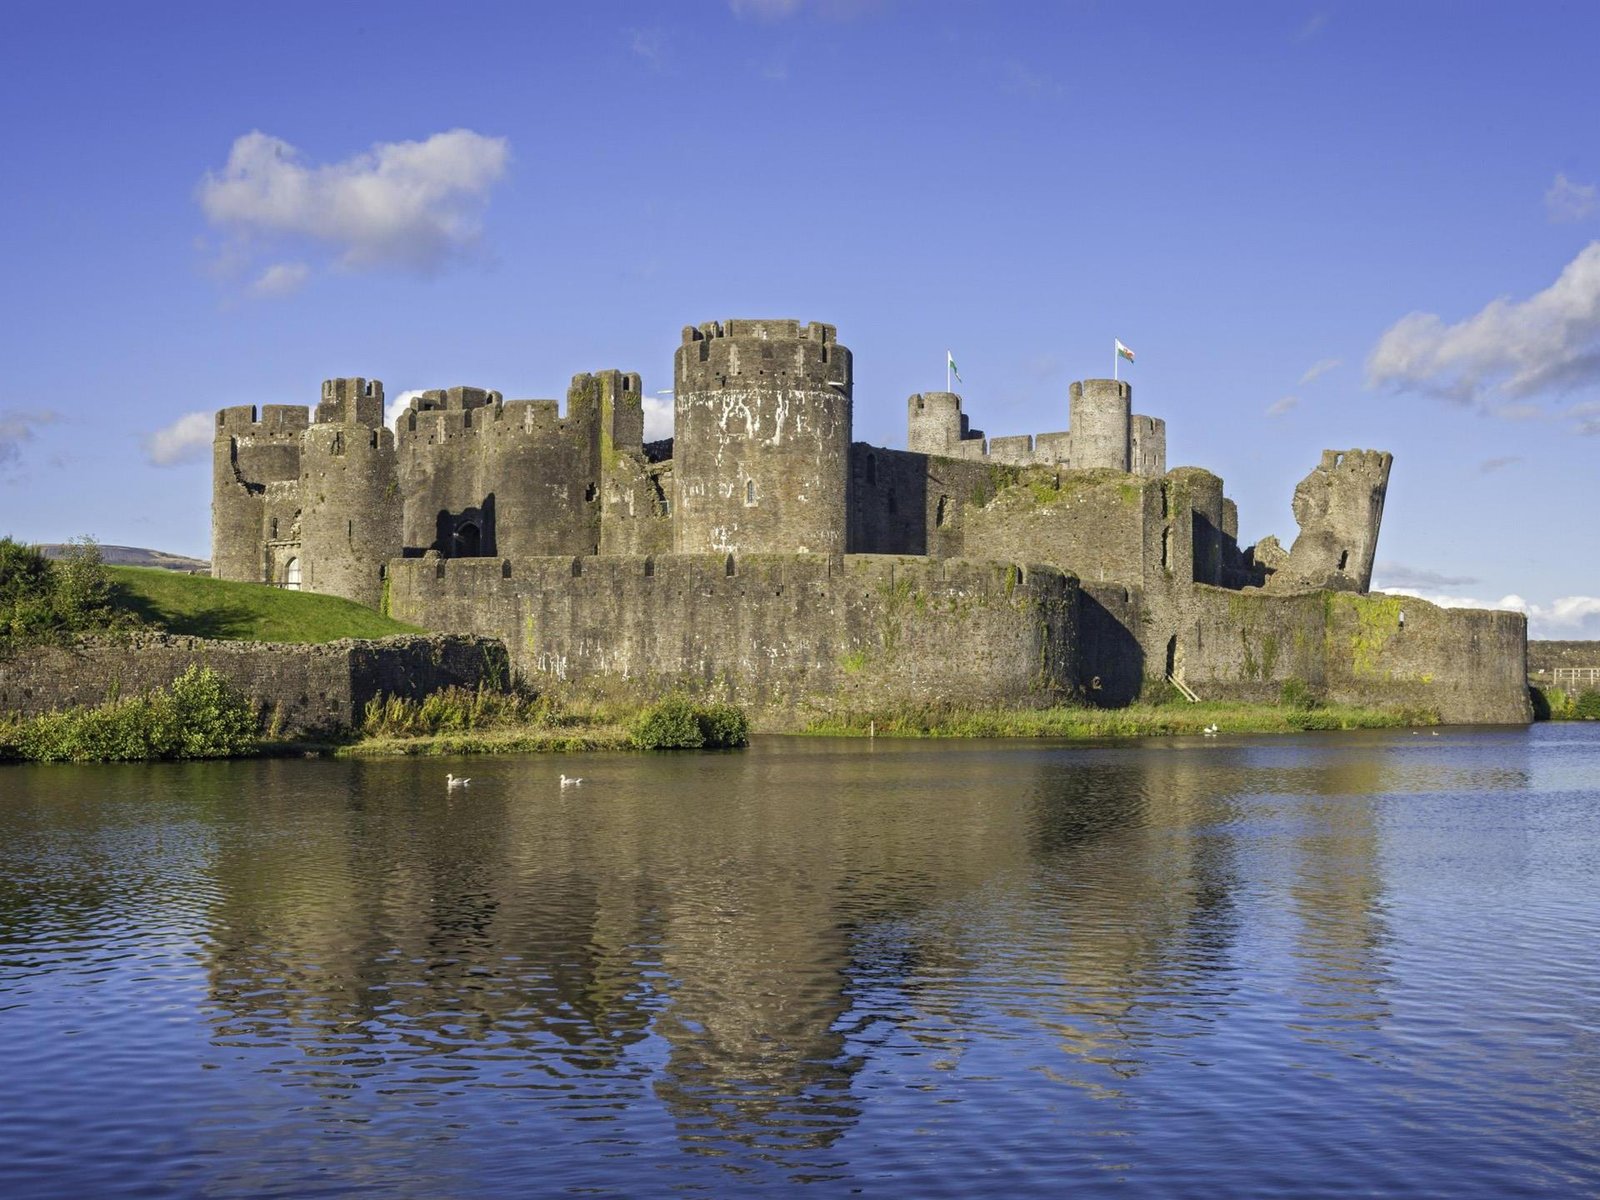 In front of Caerphilly Castle. there is a body of water and above it, a clear blue sky.